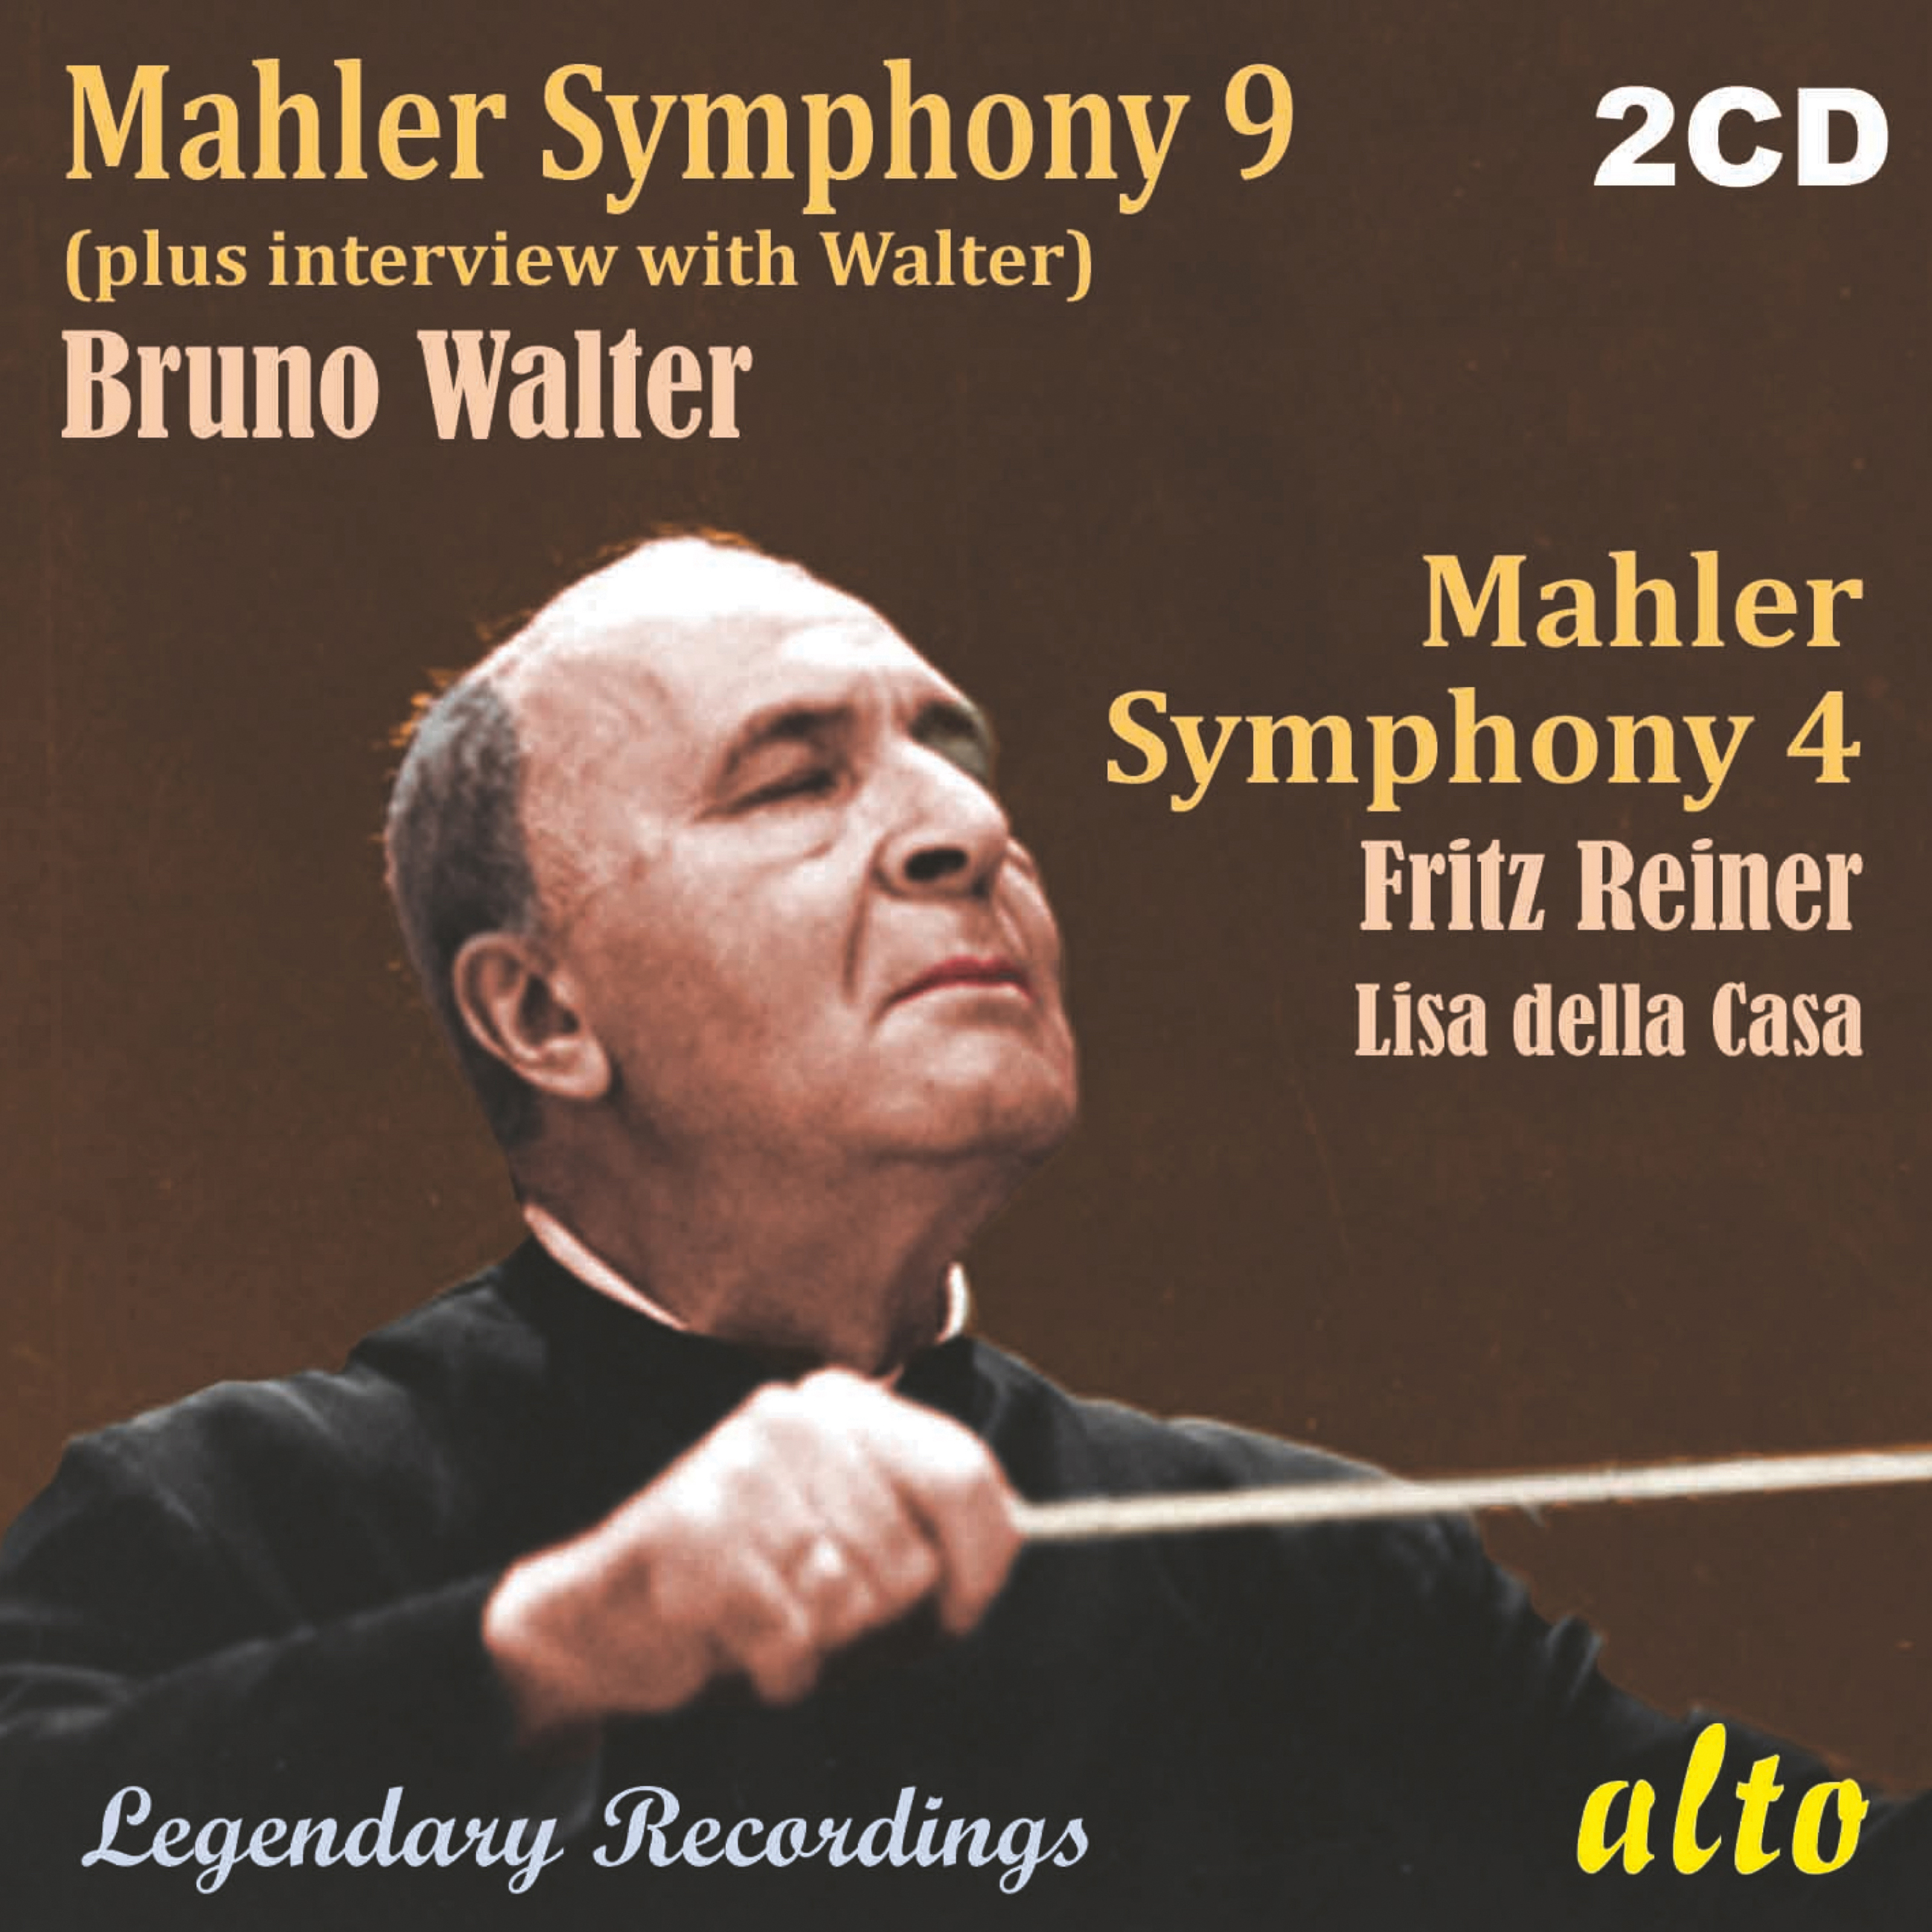 John McClure comments on Bruno Walter in Rehearsal Preparing Mahler's 9th Symphony